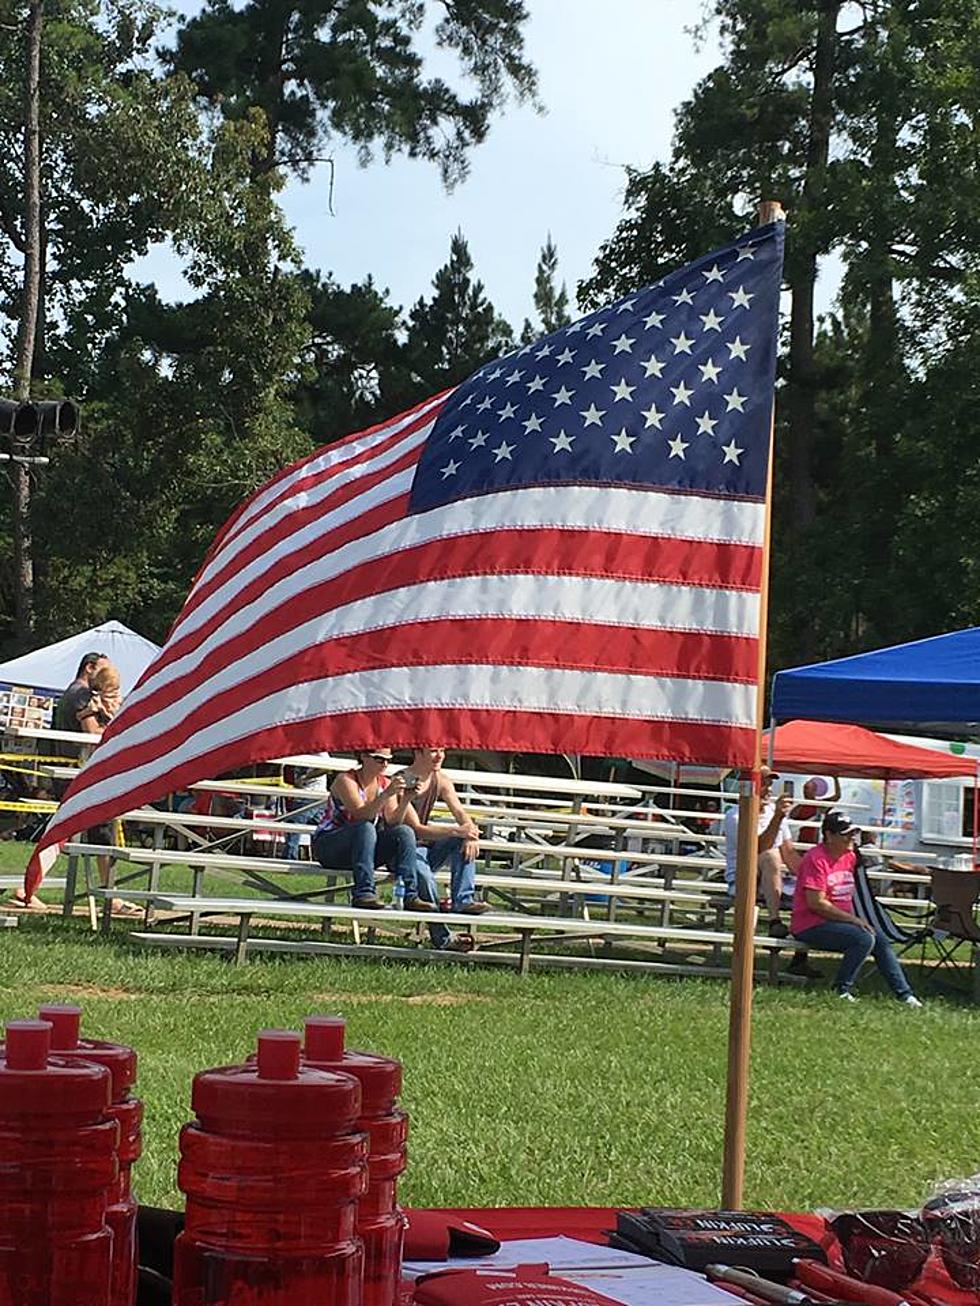 My 5 Favorite Things About The 4th At Ellen Trout Park